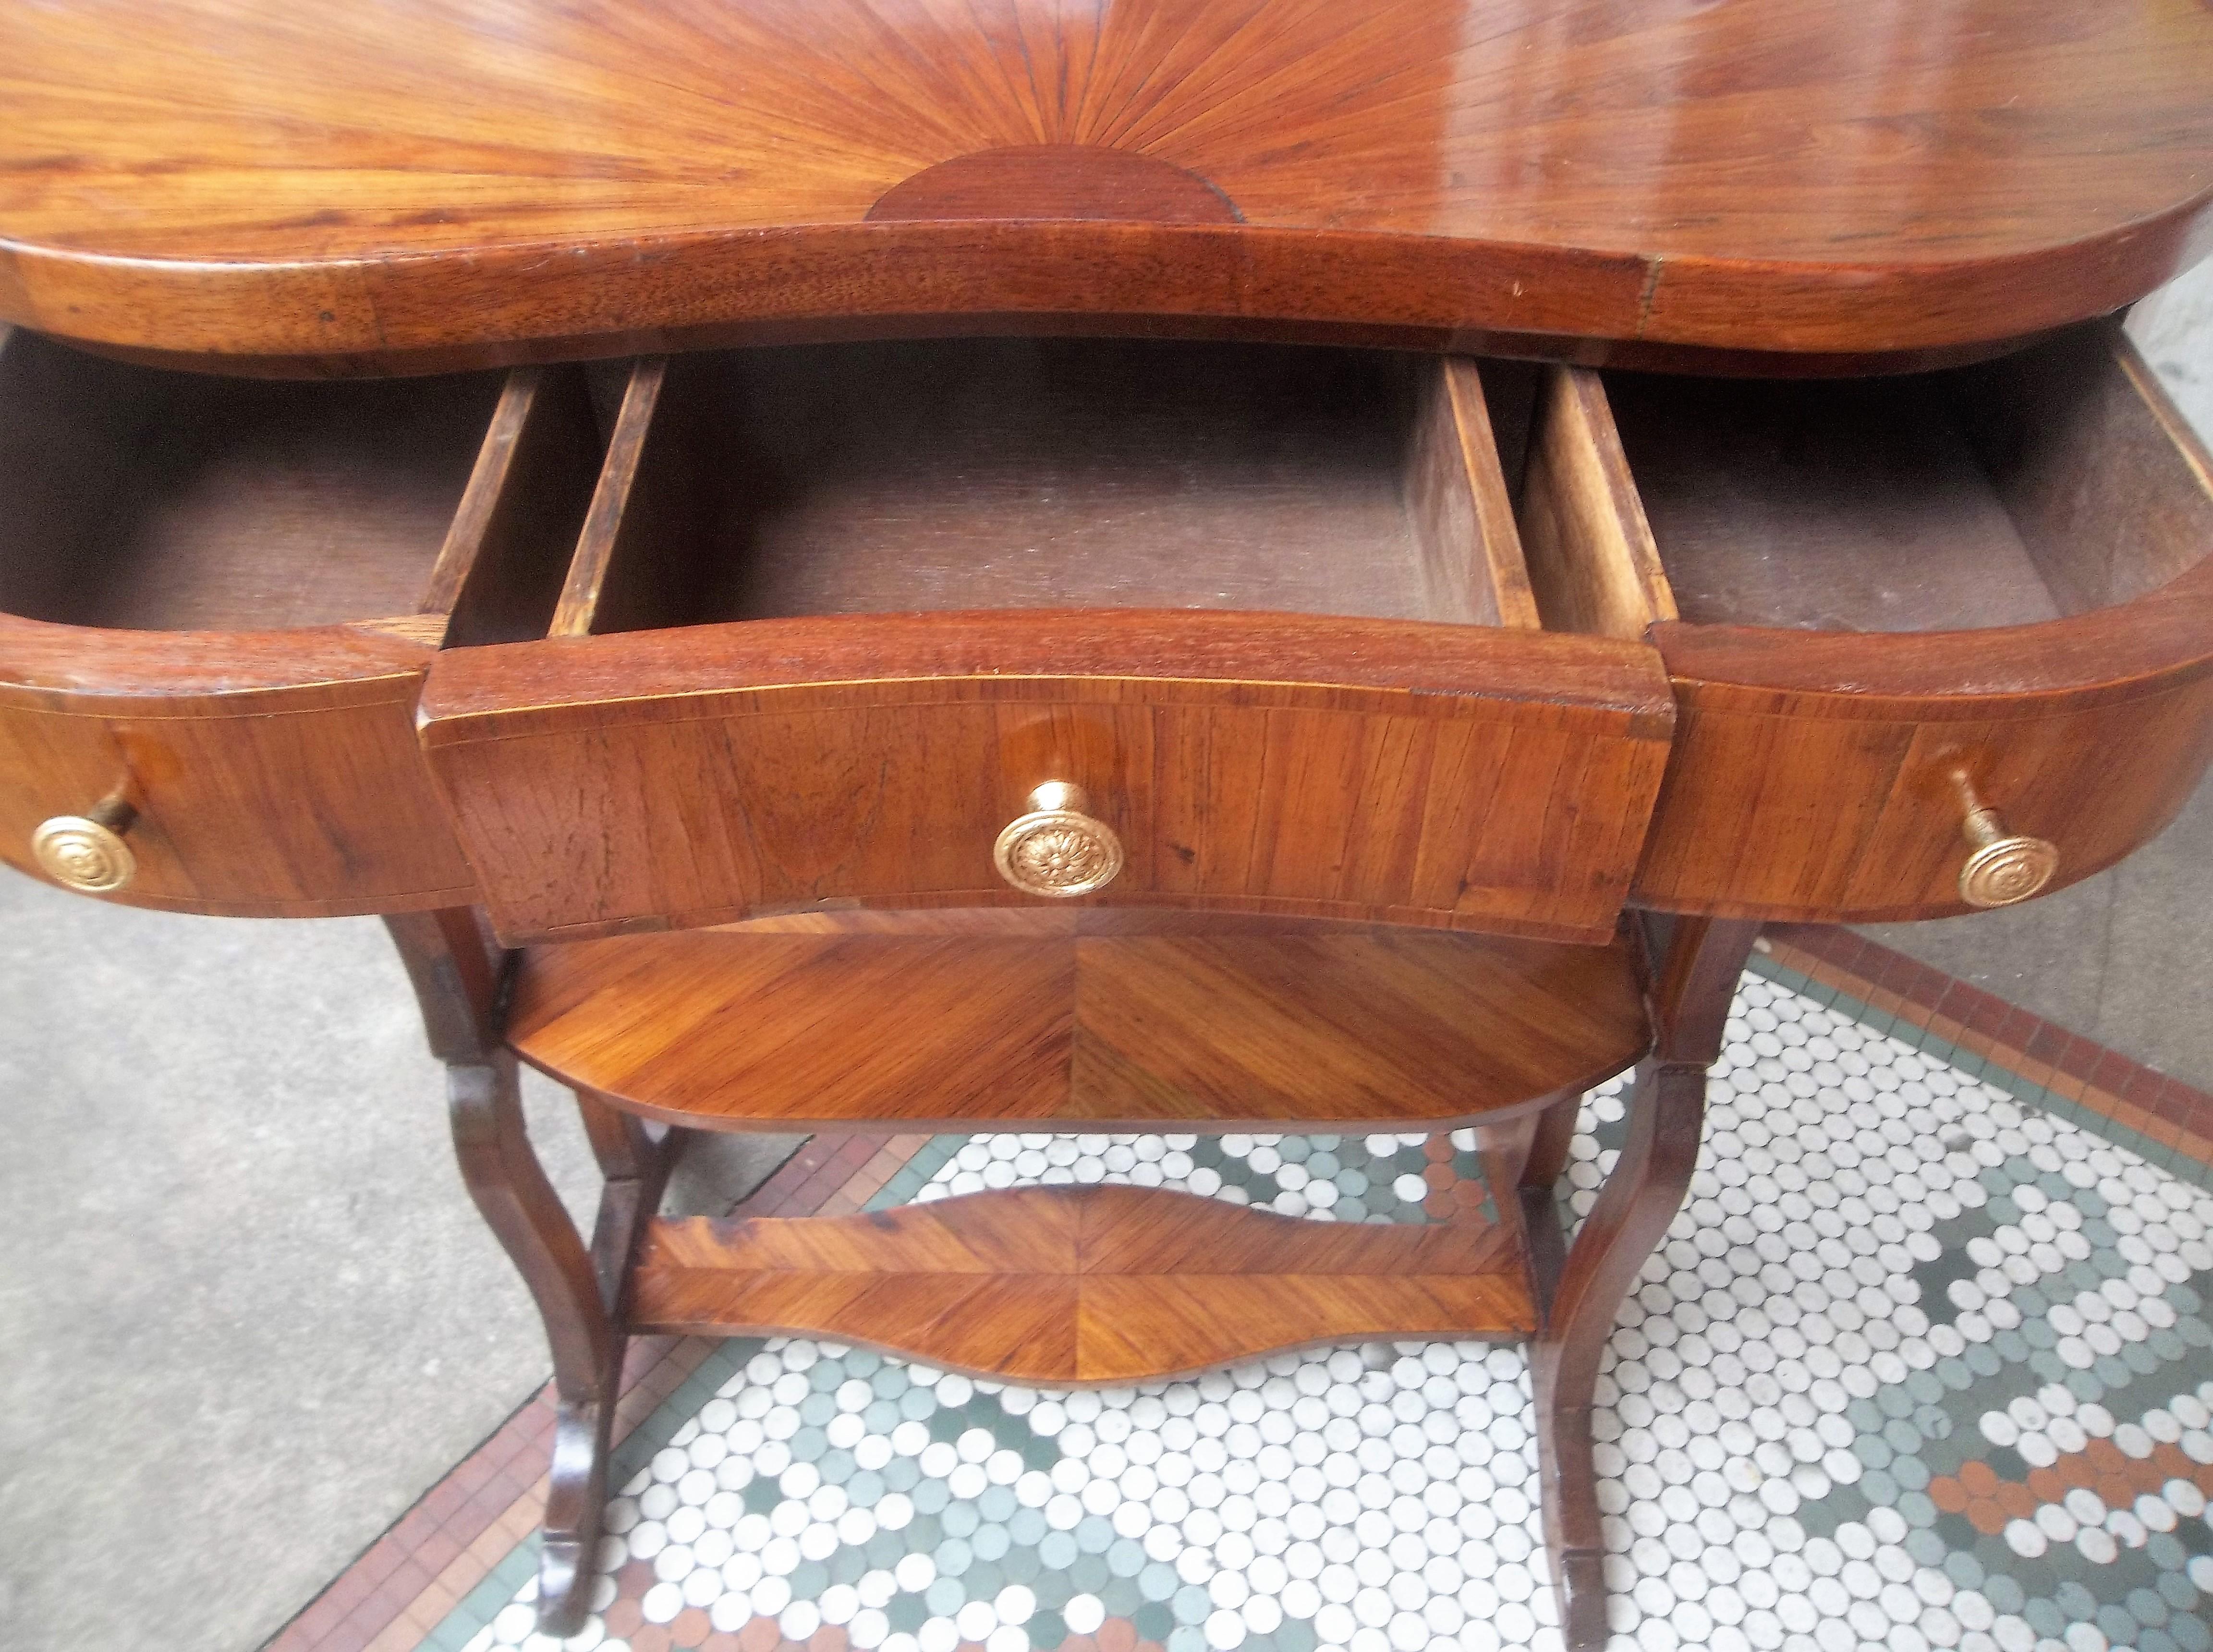 Louis Xvi Style Tulipwood Three-Tiered Desk or Dressing Table with Sunburst Top 3